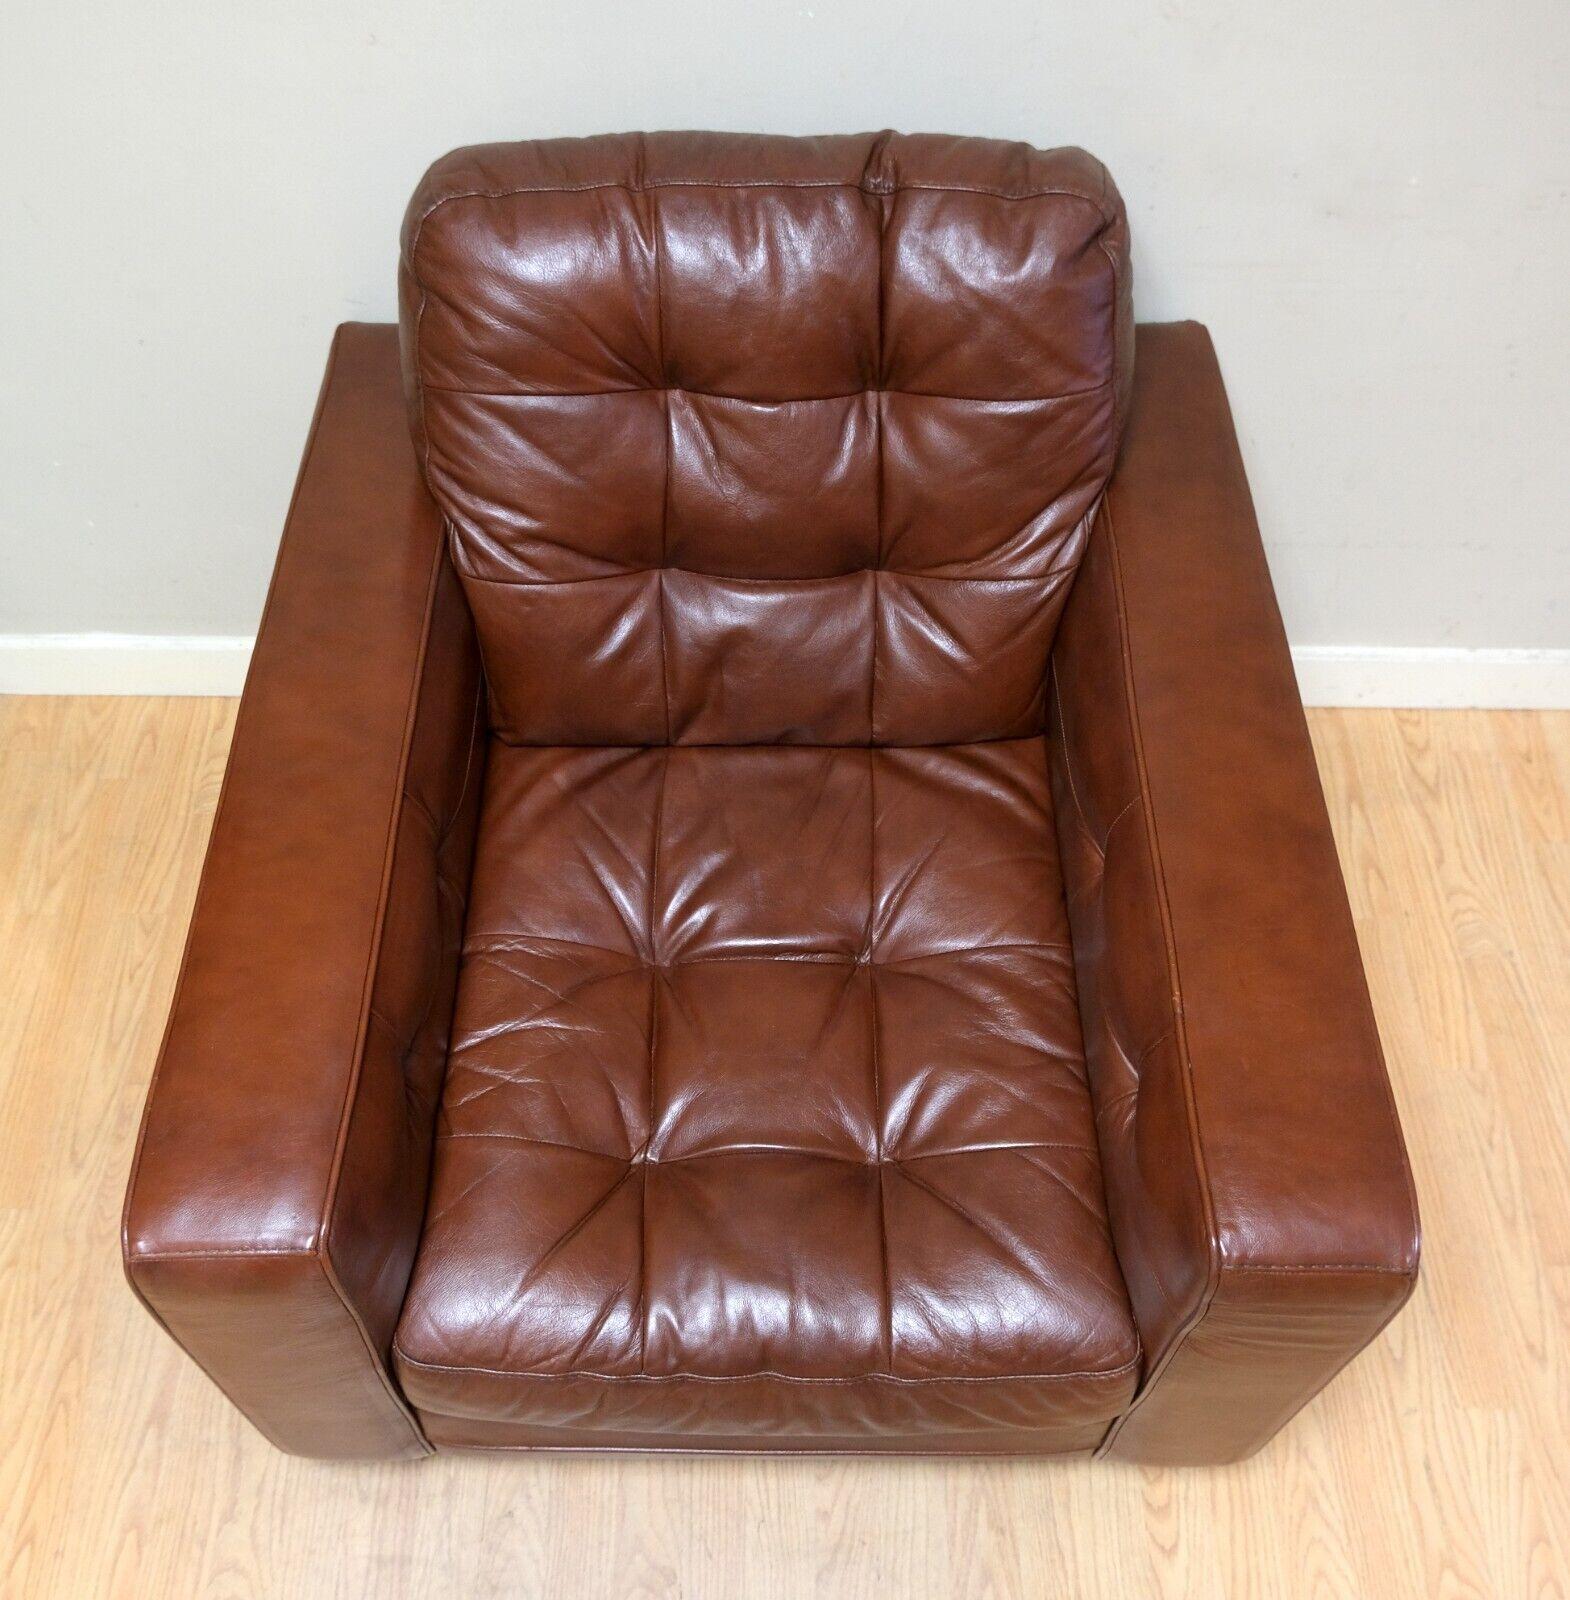 We are delighted to offer for sale this lovely Knoll style brown leather armchair with chesterfield style buttoning. 

This piece is good looking and super comfortable, everything compliments with the soft leather. The Knoll style makes it very